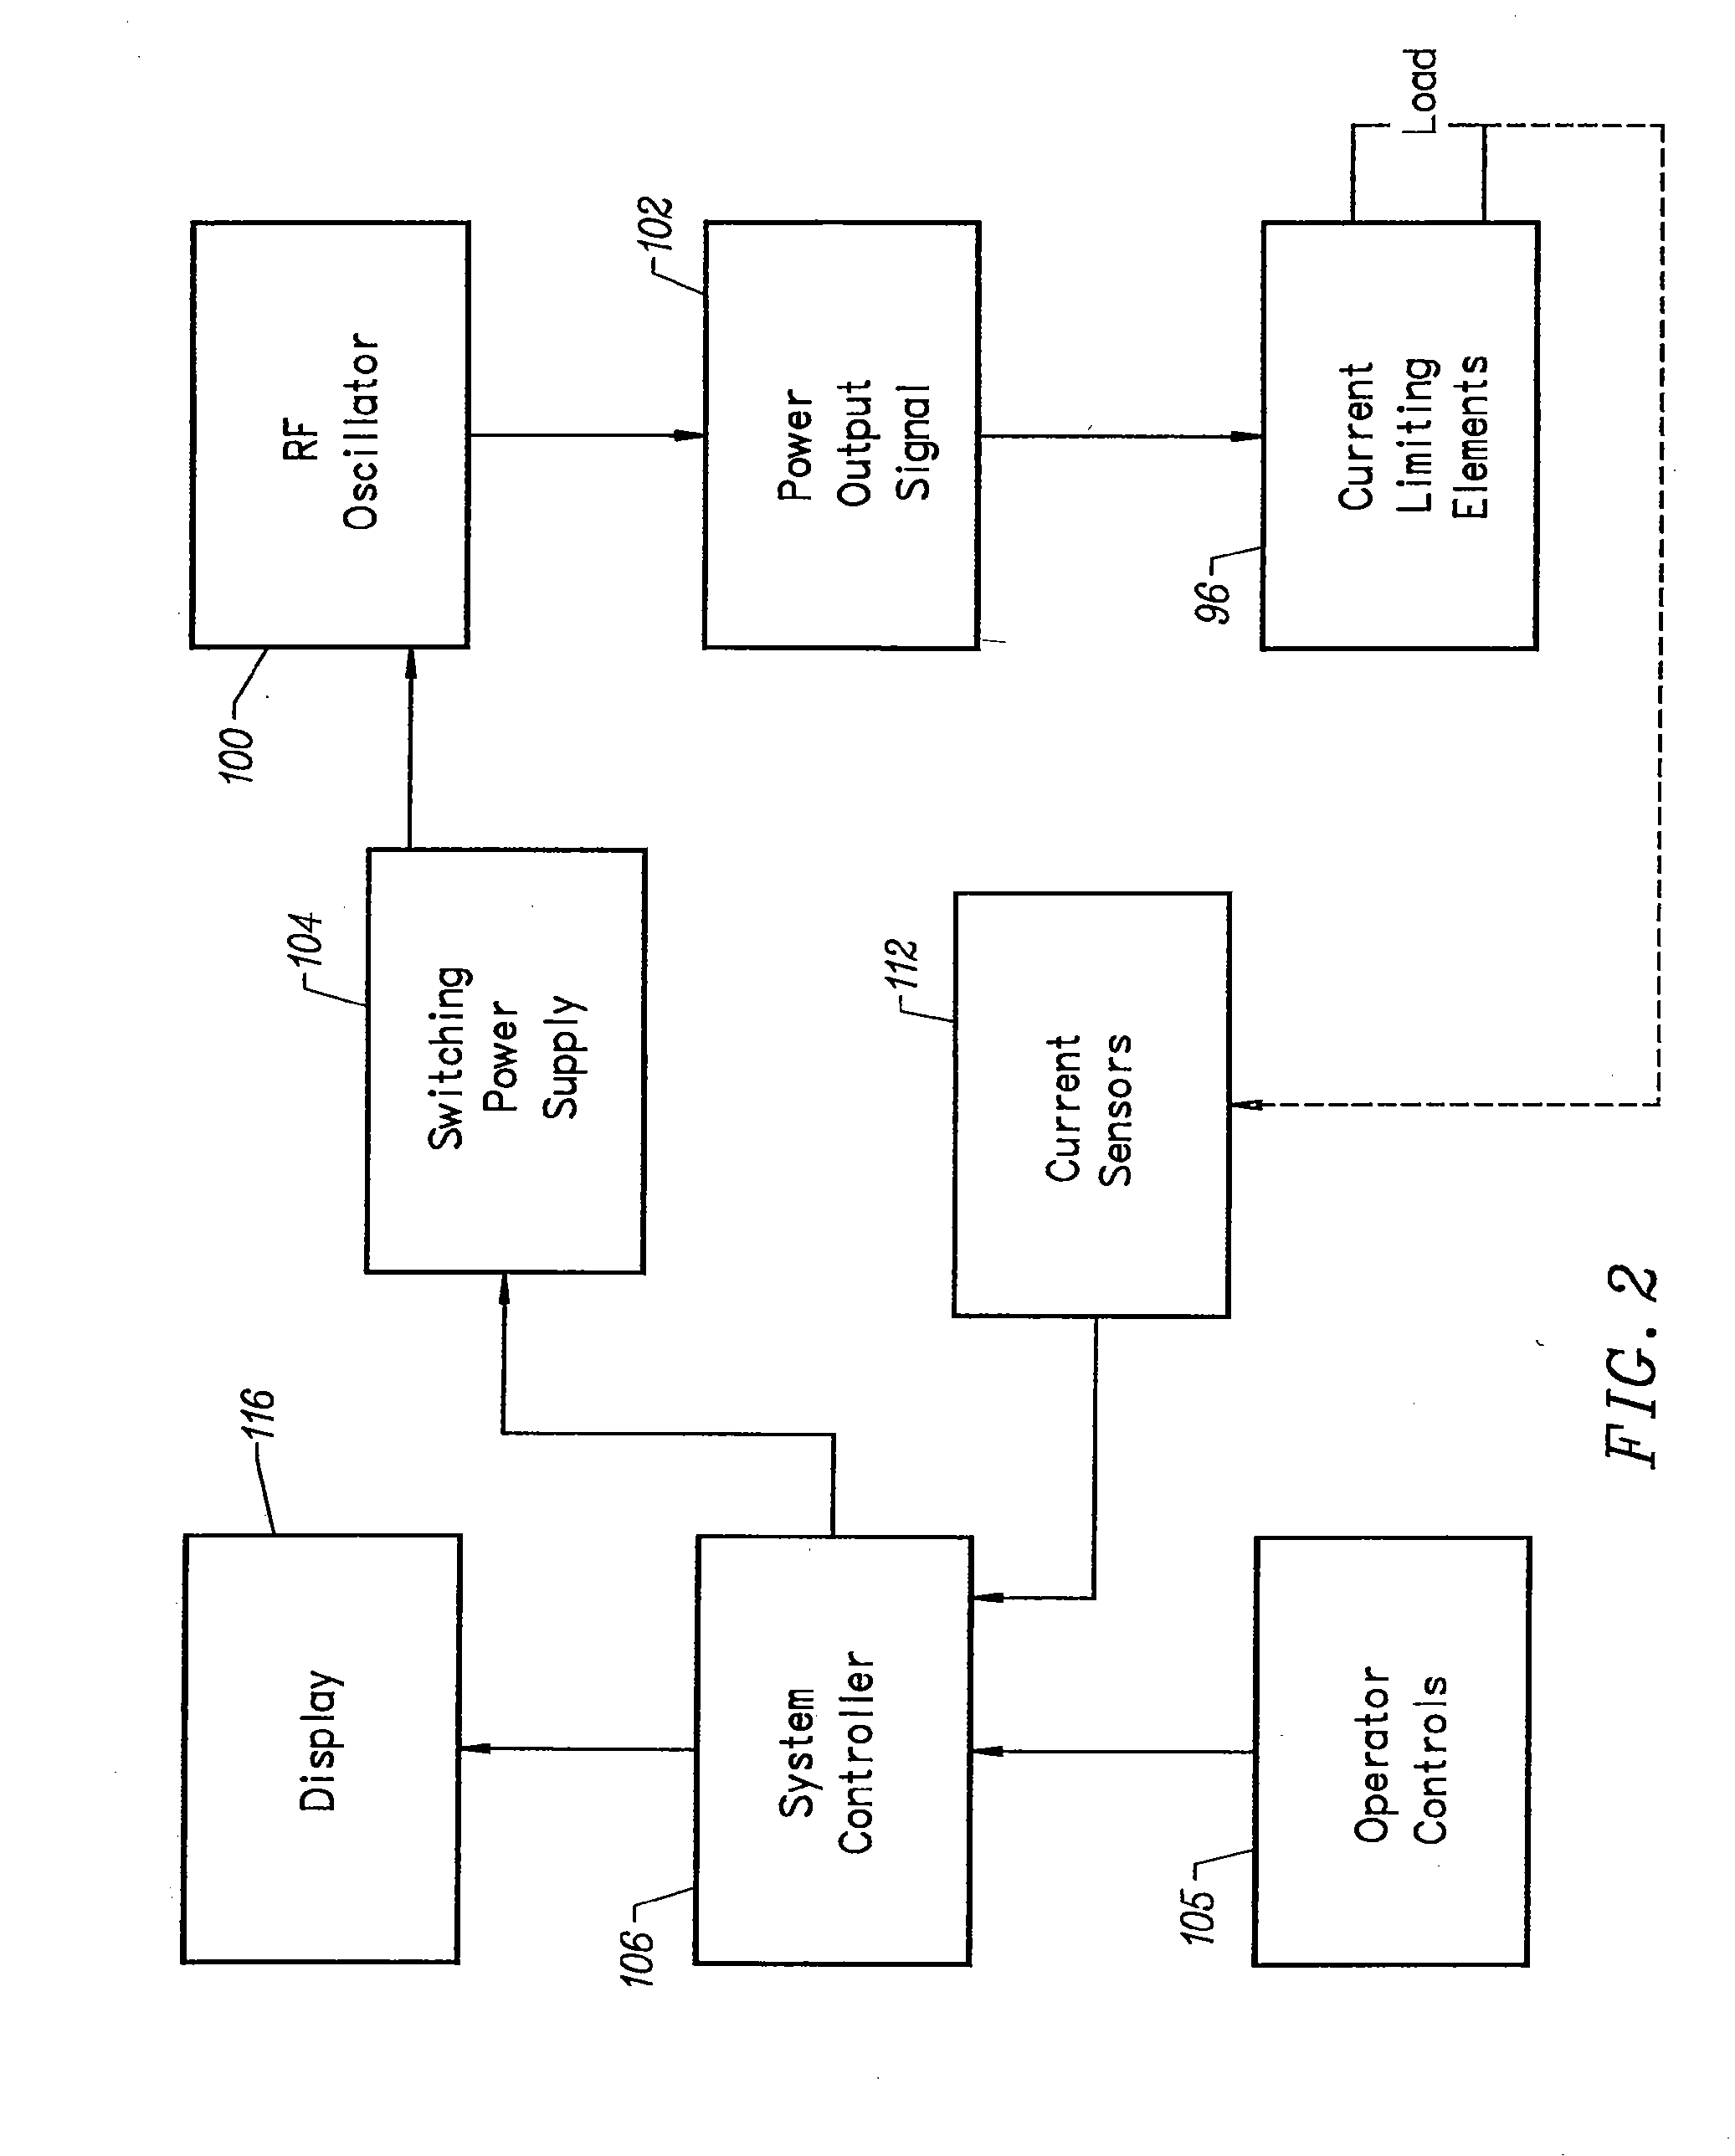 Instrument for electrosurgical tissue treatment